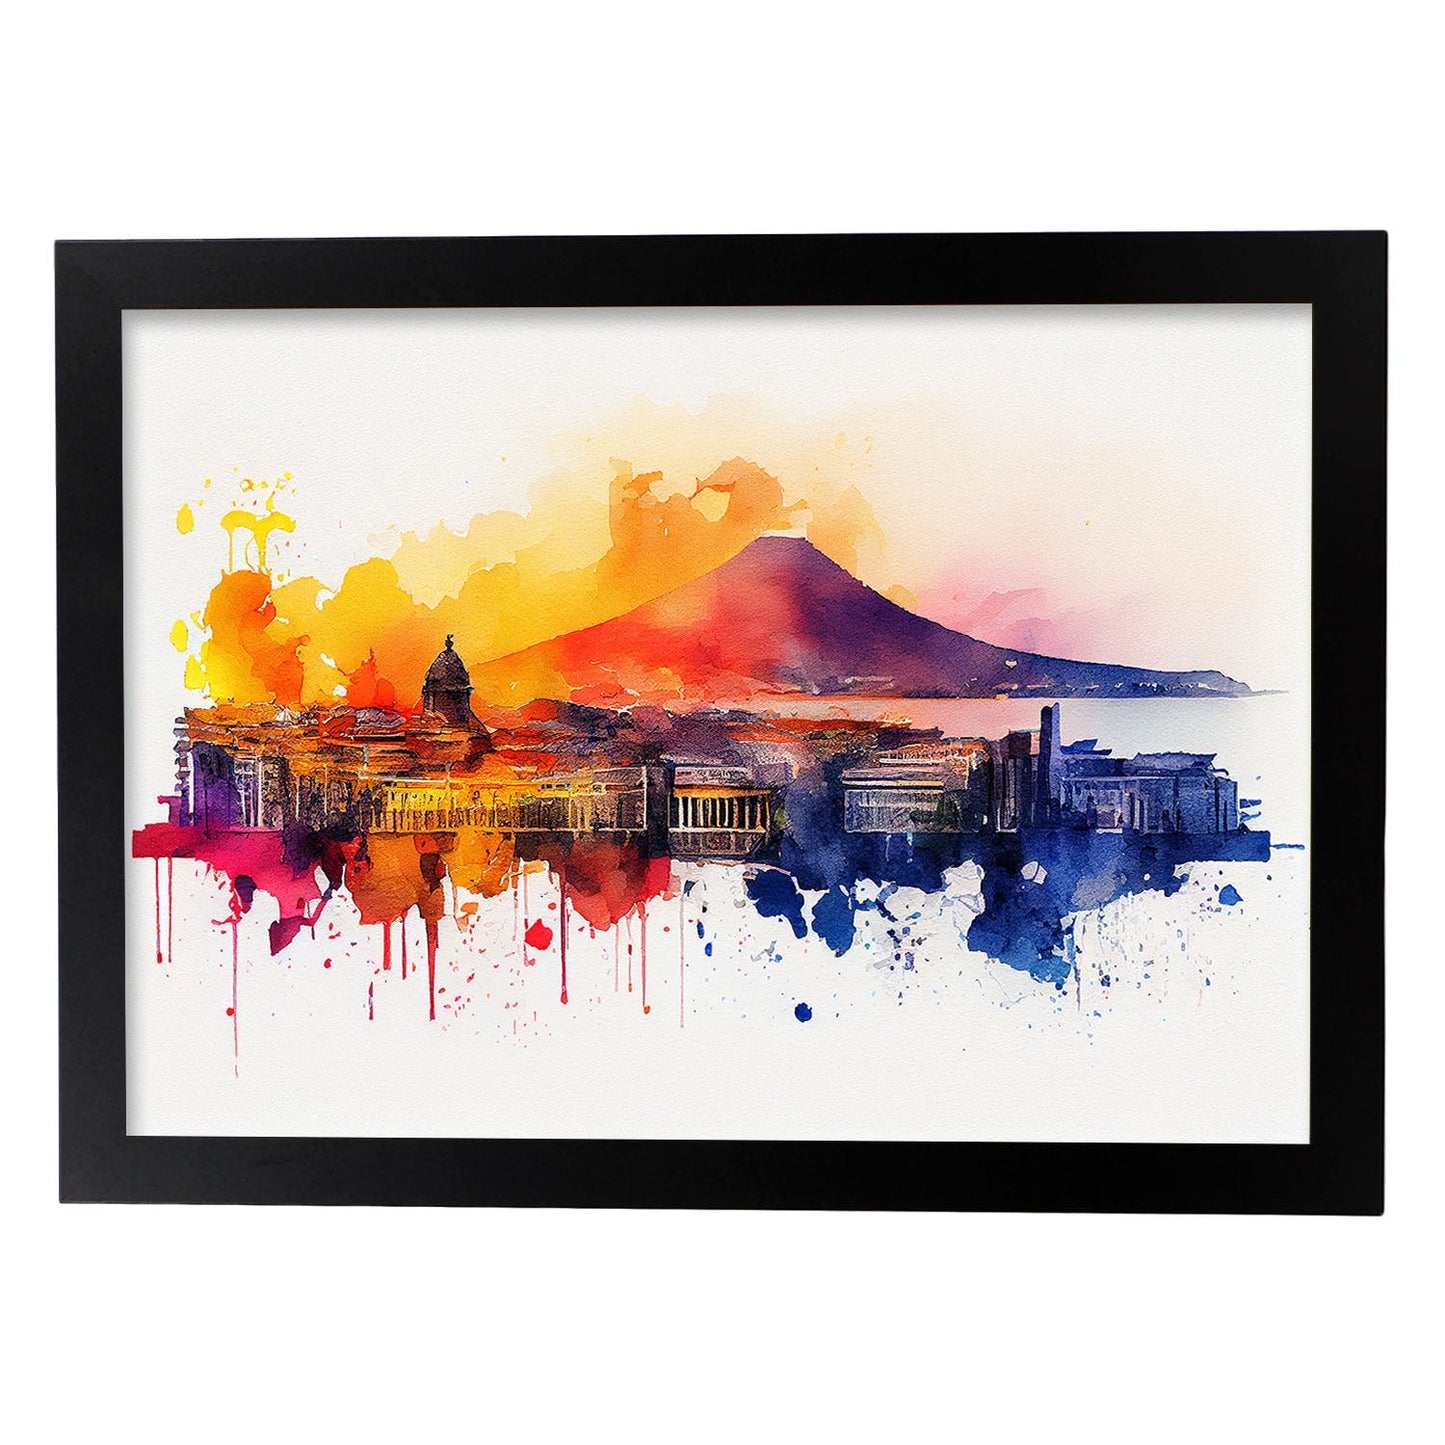 Nacnic watercolor of a skyline of the city of Naples. Aesthetic Wall Art Prints for Bedroom or Living Room Design.